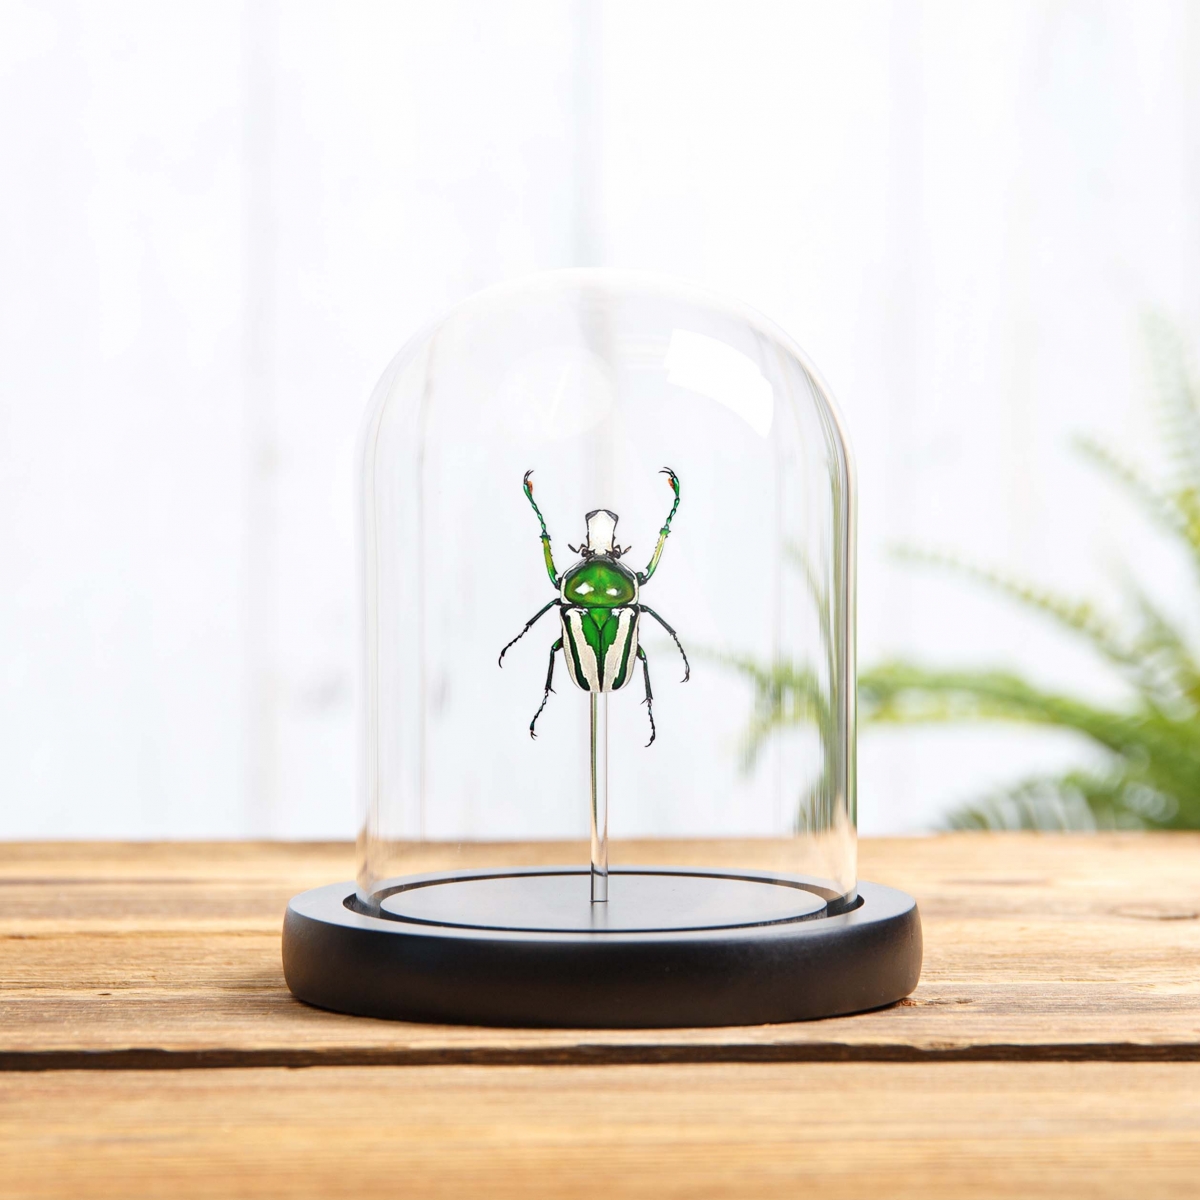 Minibeast Green Scarab Beetle in Glass Dome with Wooden Base (Ranzania splendens)